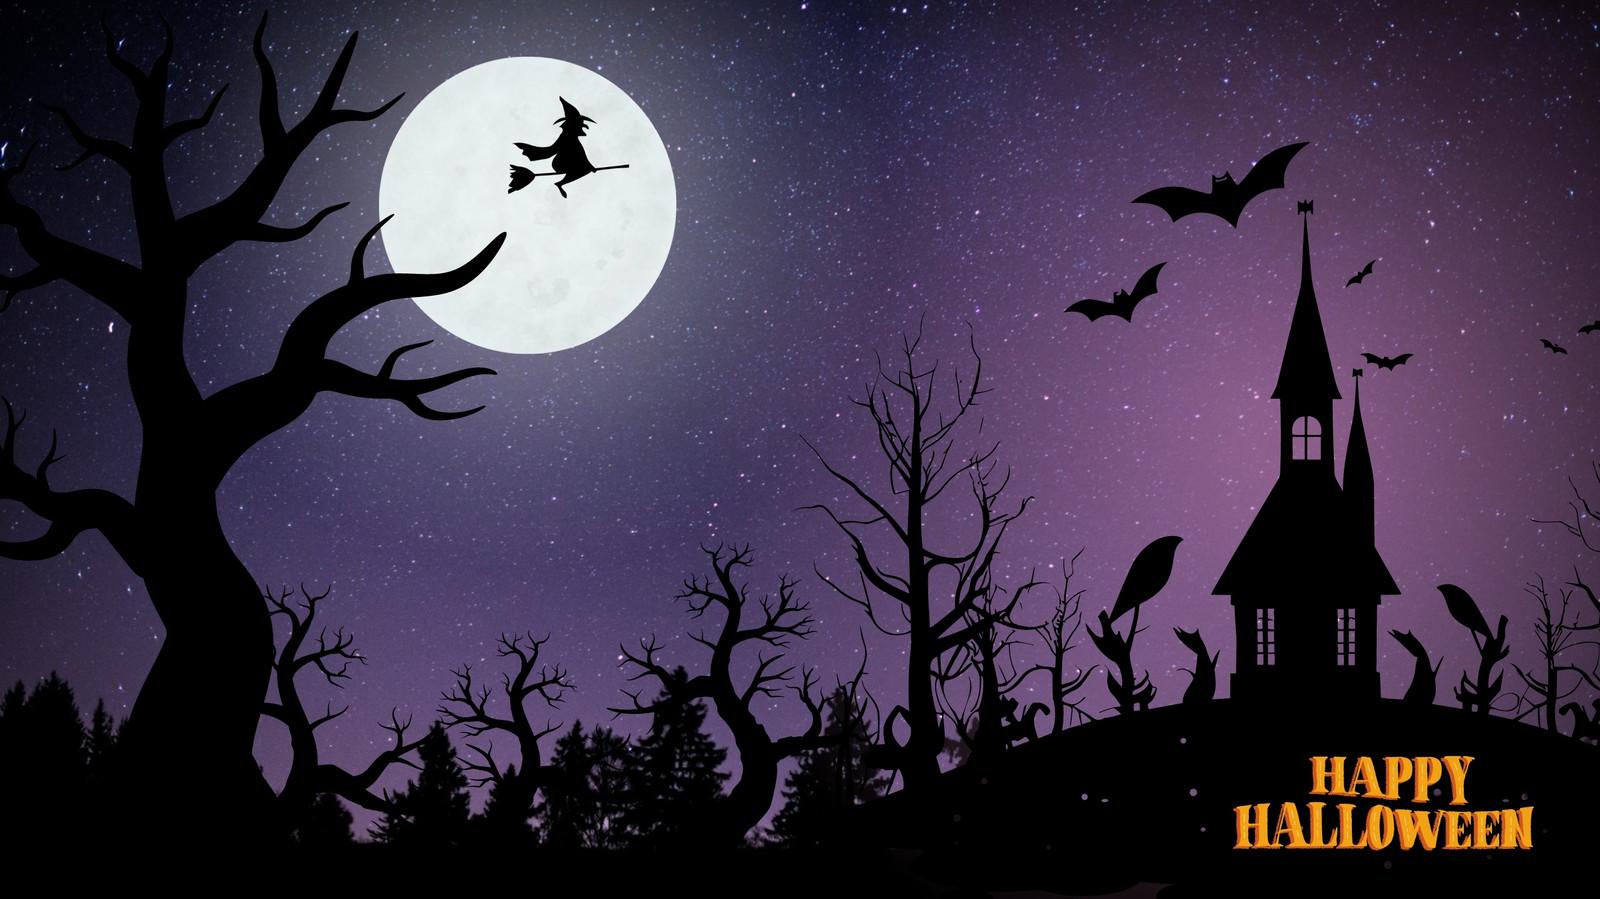 Halloween Zoom Virtual Background Templates To Edit